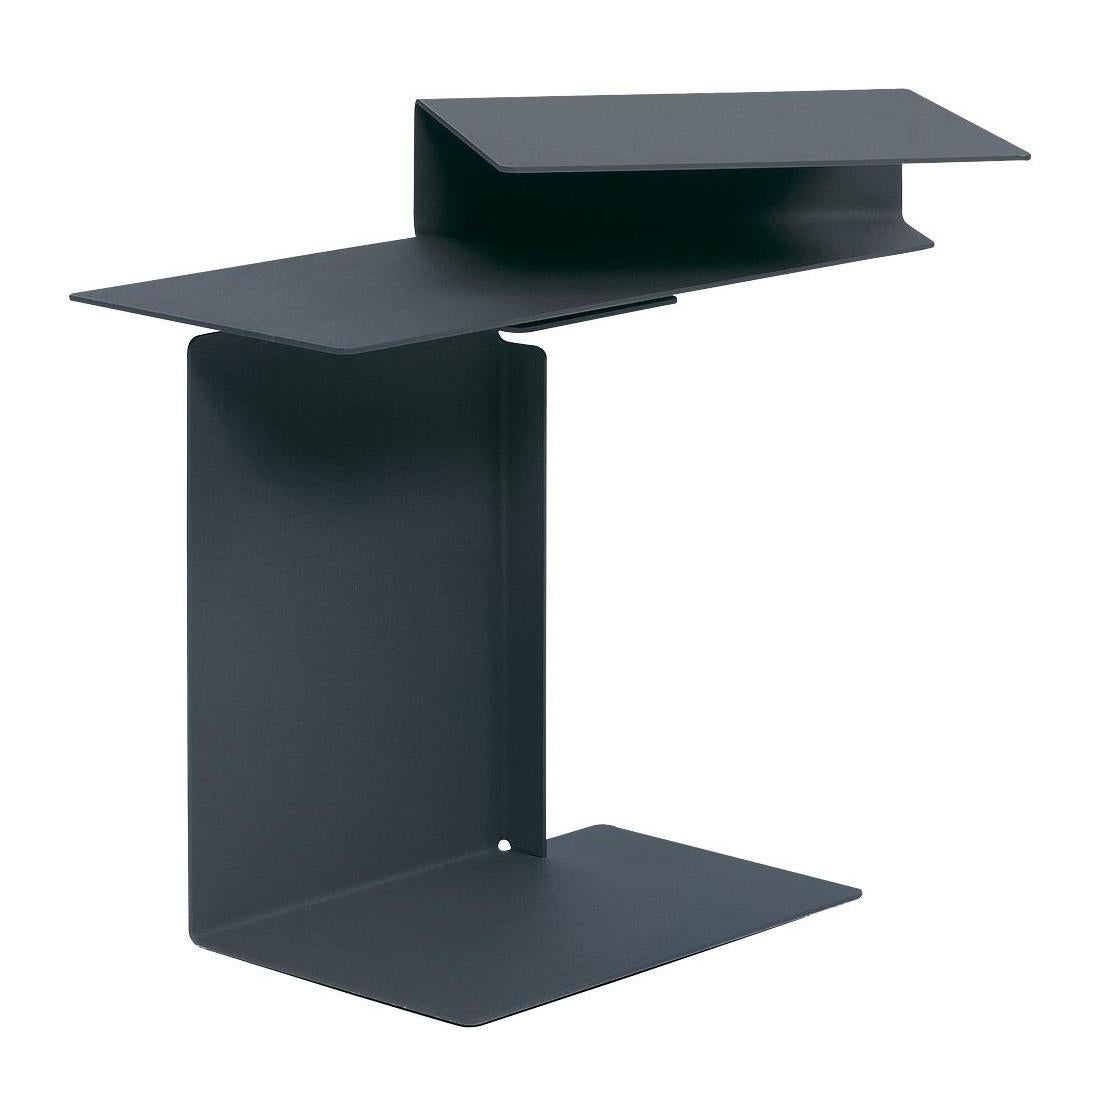 Modern Classicon Black Diana E side Table designed by Konstantin Grcic